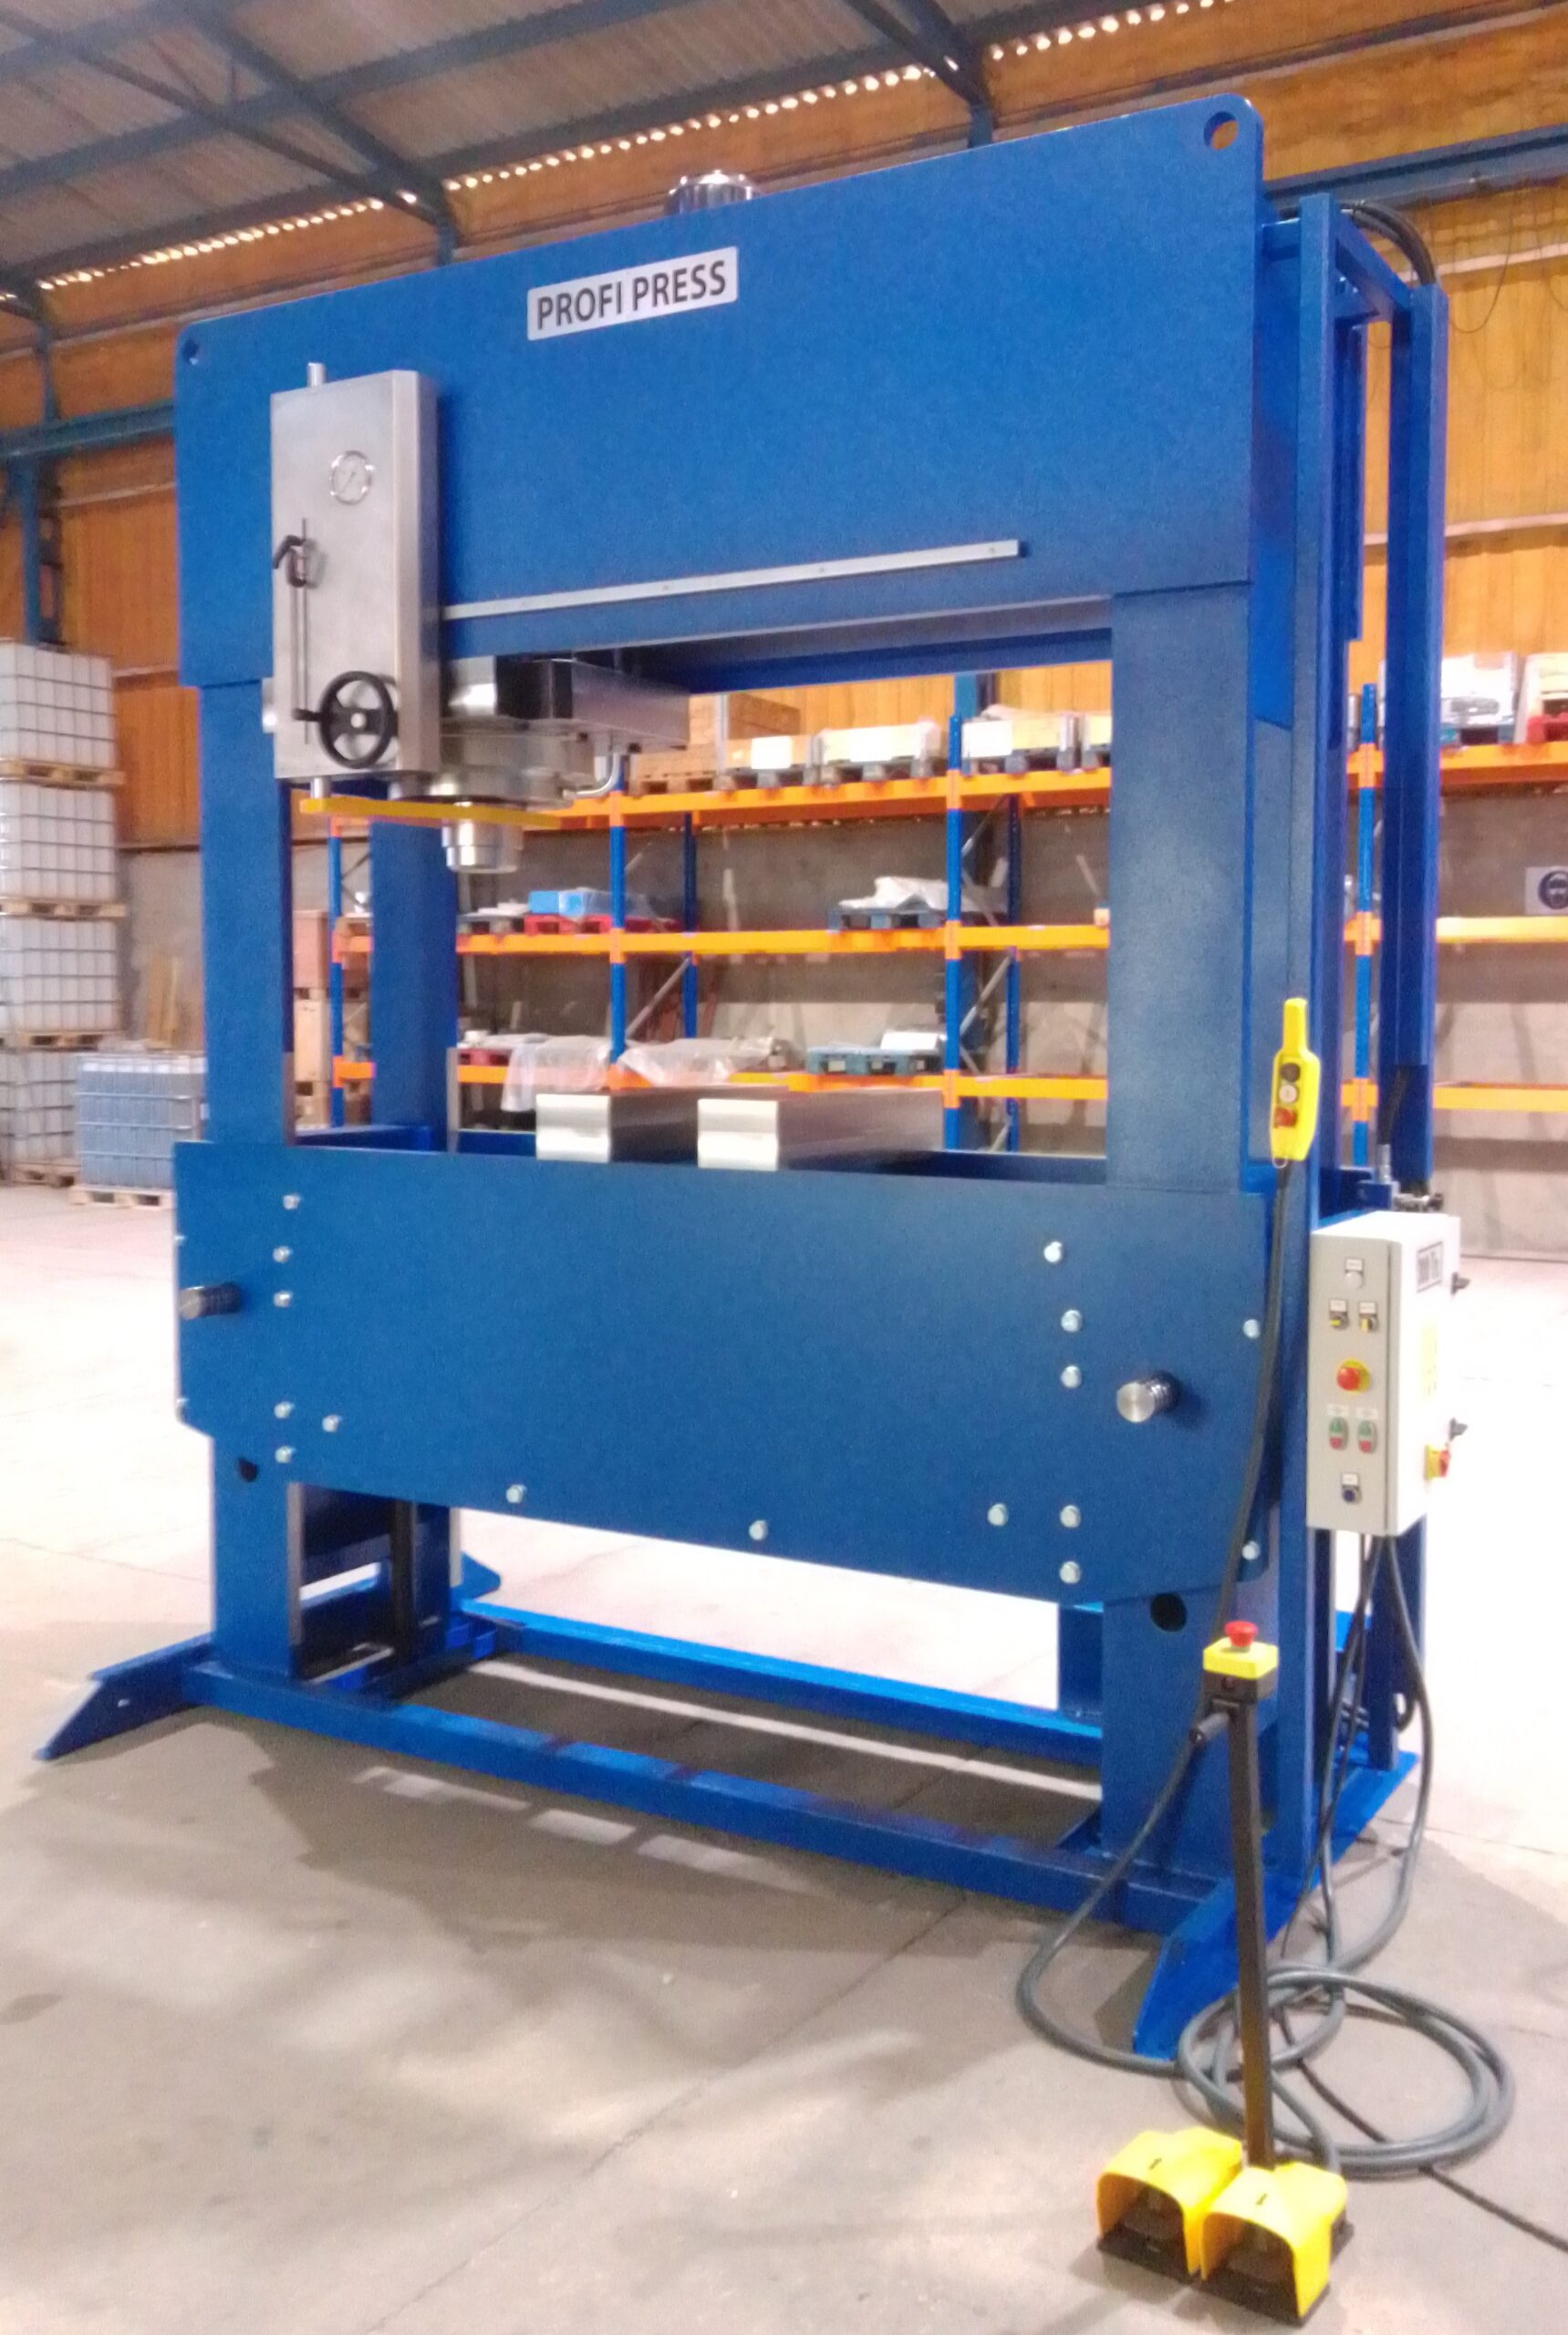 Special Hydraulic Press with 300 Tons Capacity